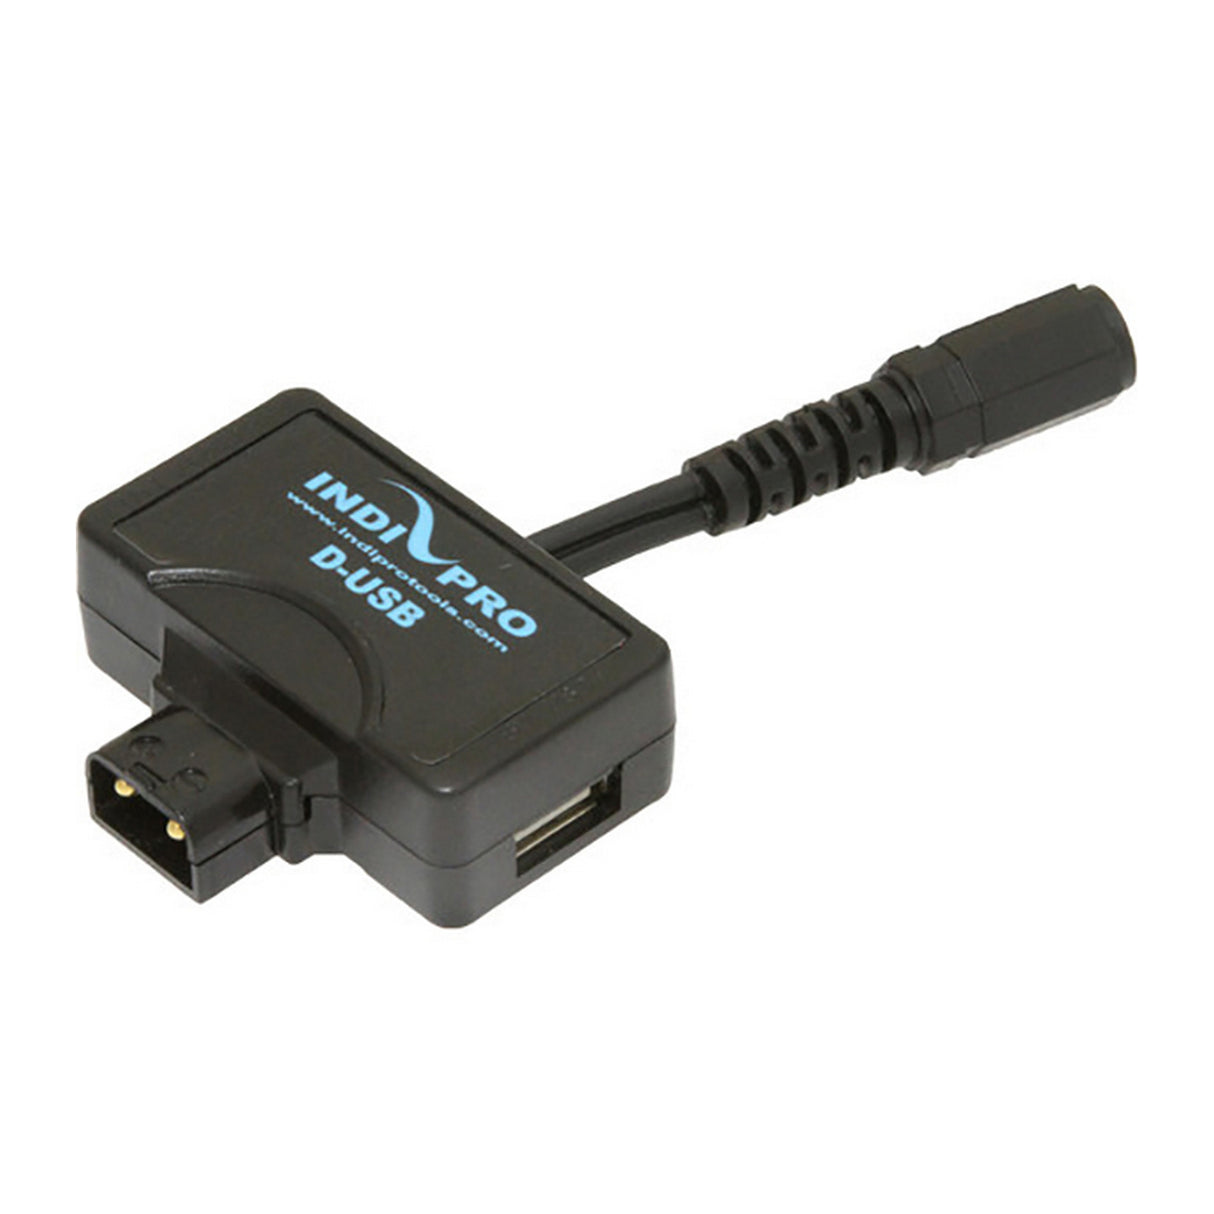 IndiPRO DTUSB99 | D-USB Adapter with 2.5mm Cable